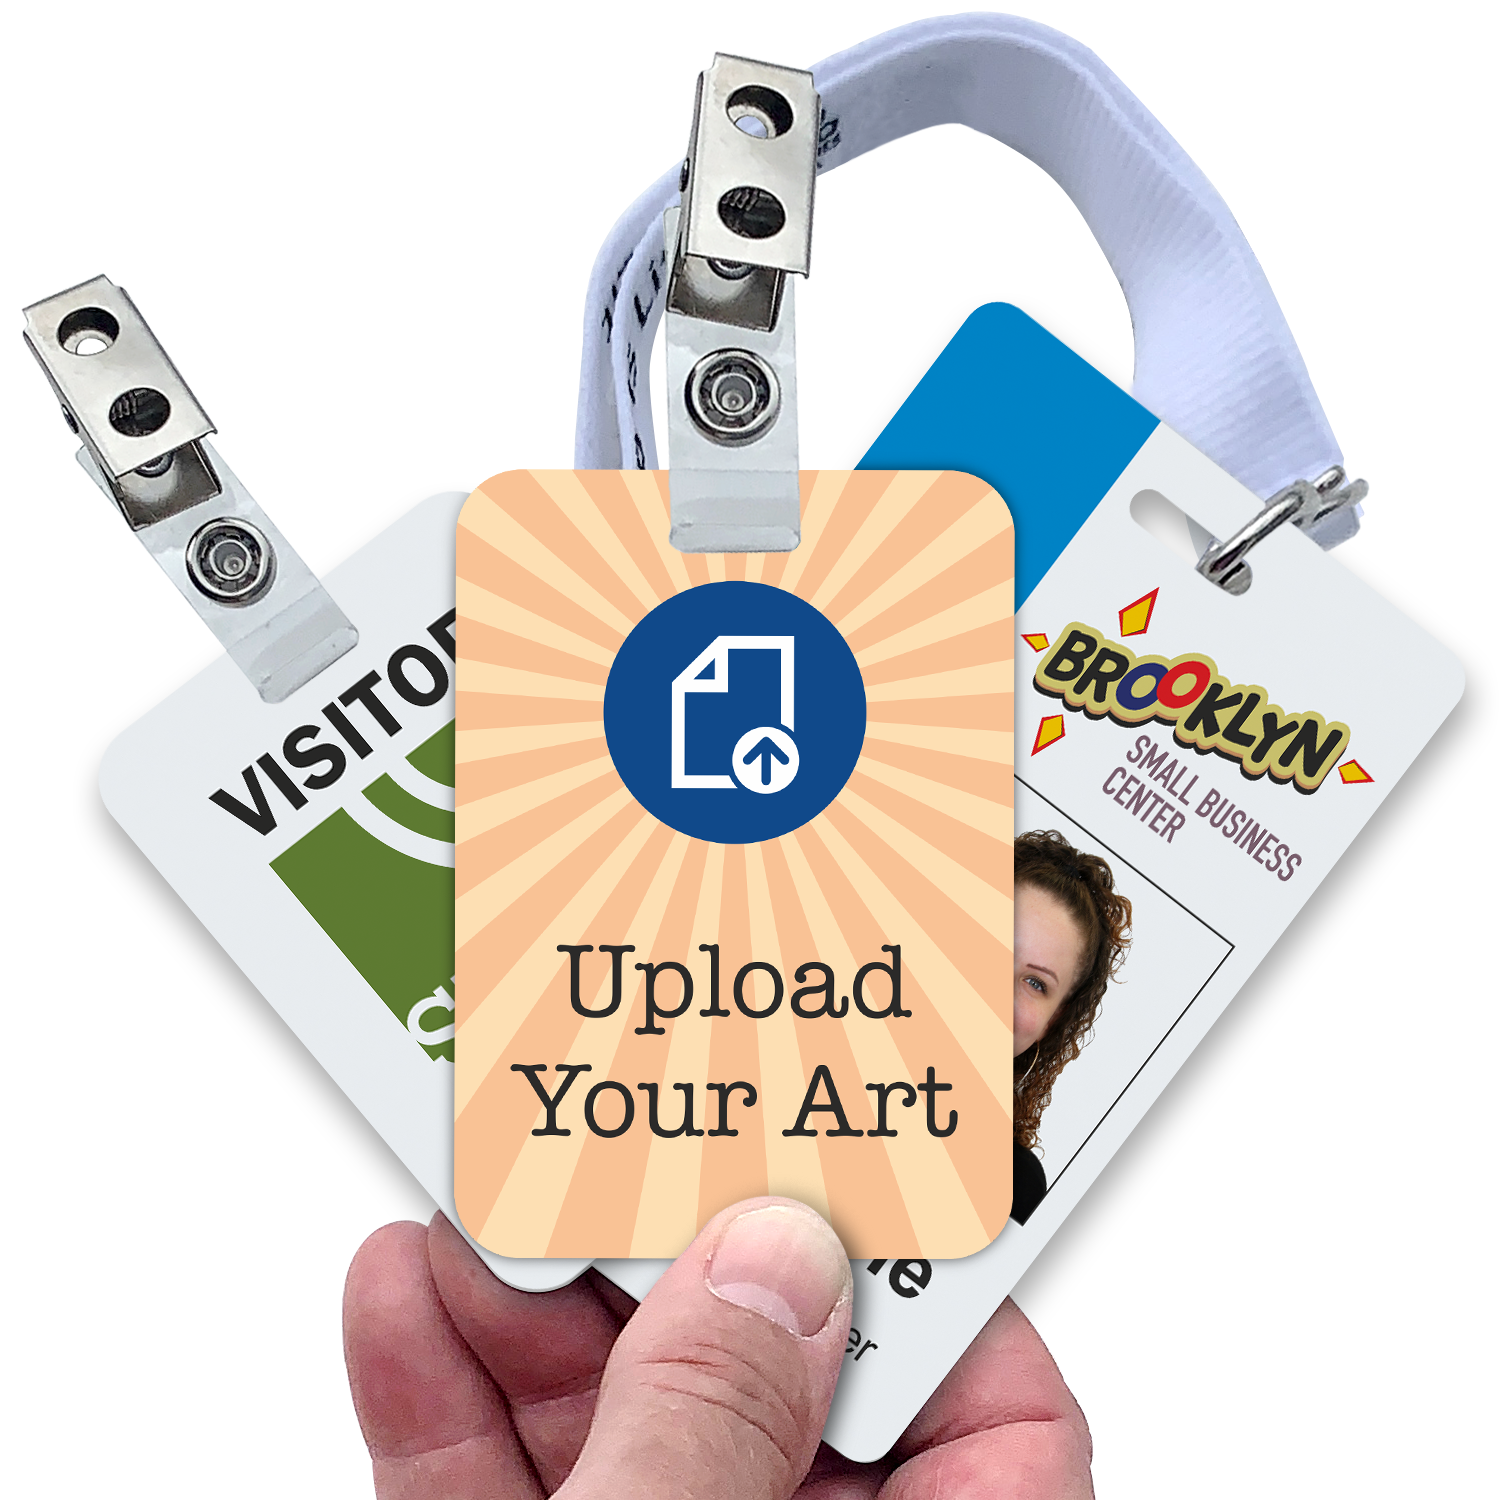 Visitor Badges Template